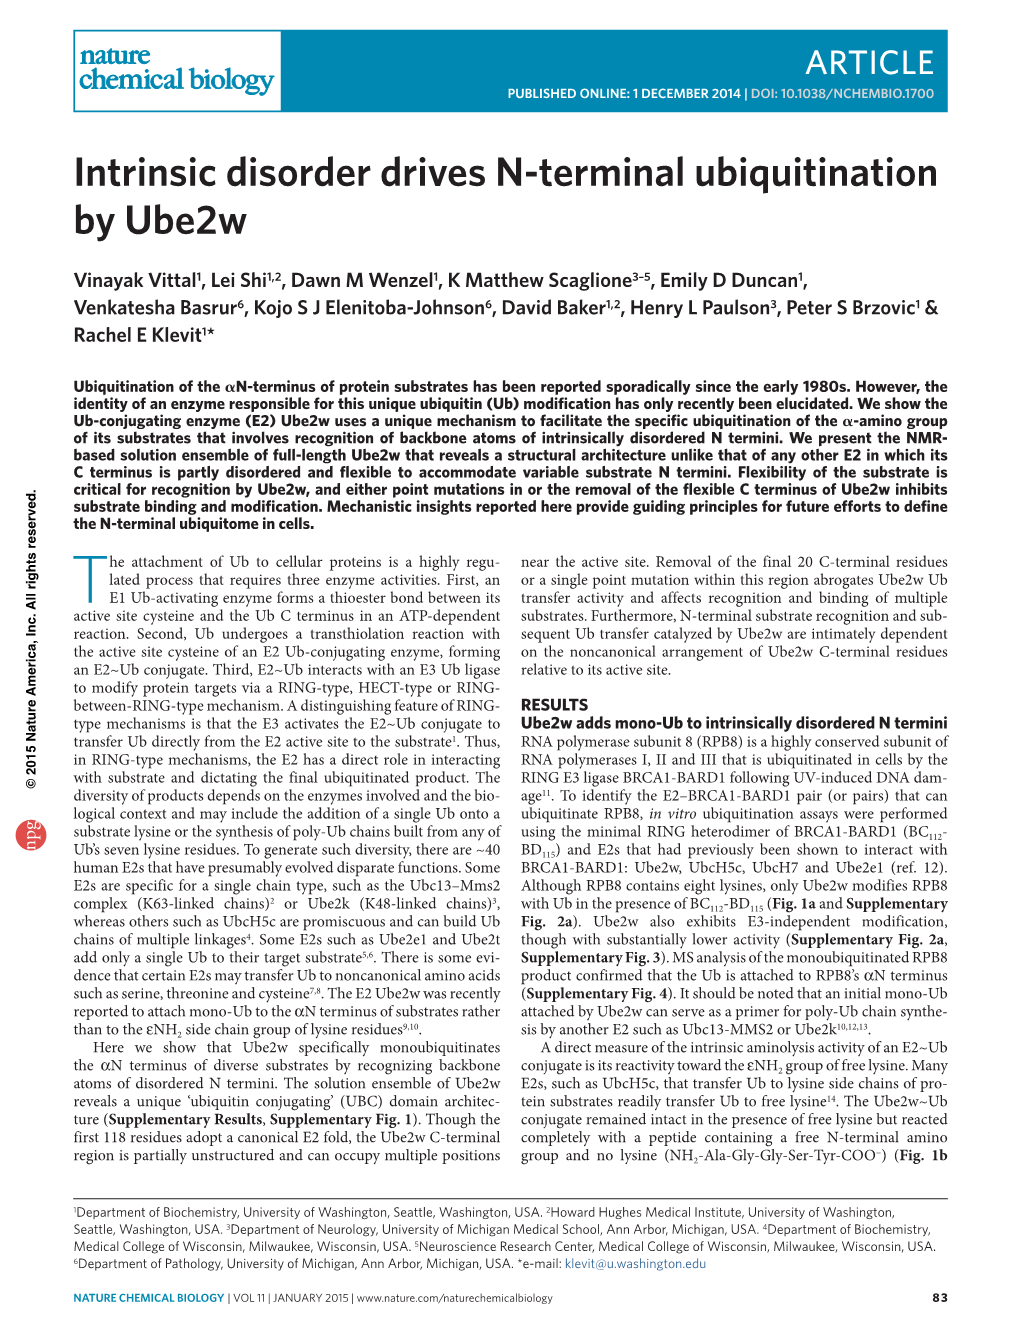 Intrinsic Disorder Drives N-Terminal Ubiquitination by Ube2w